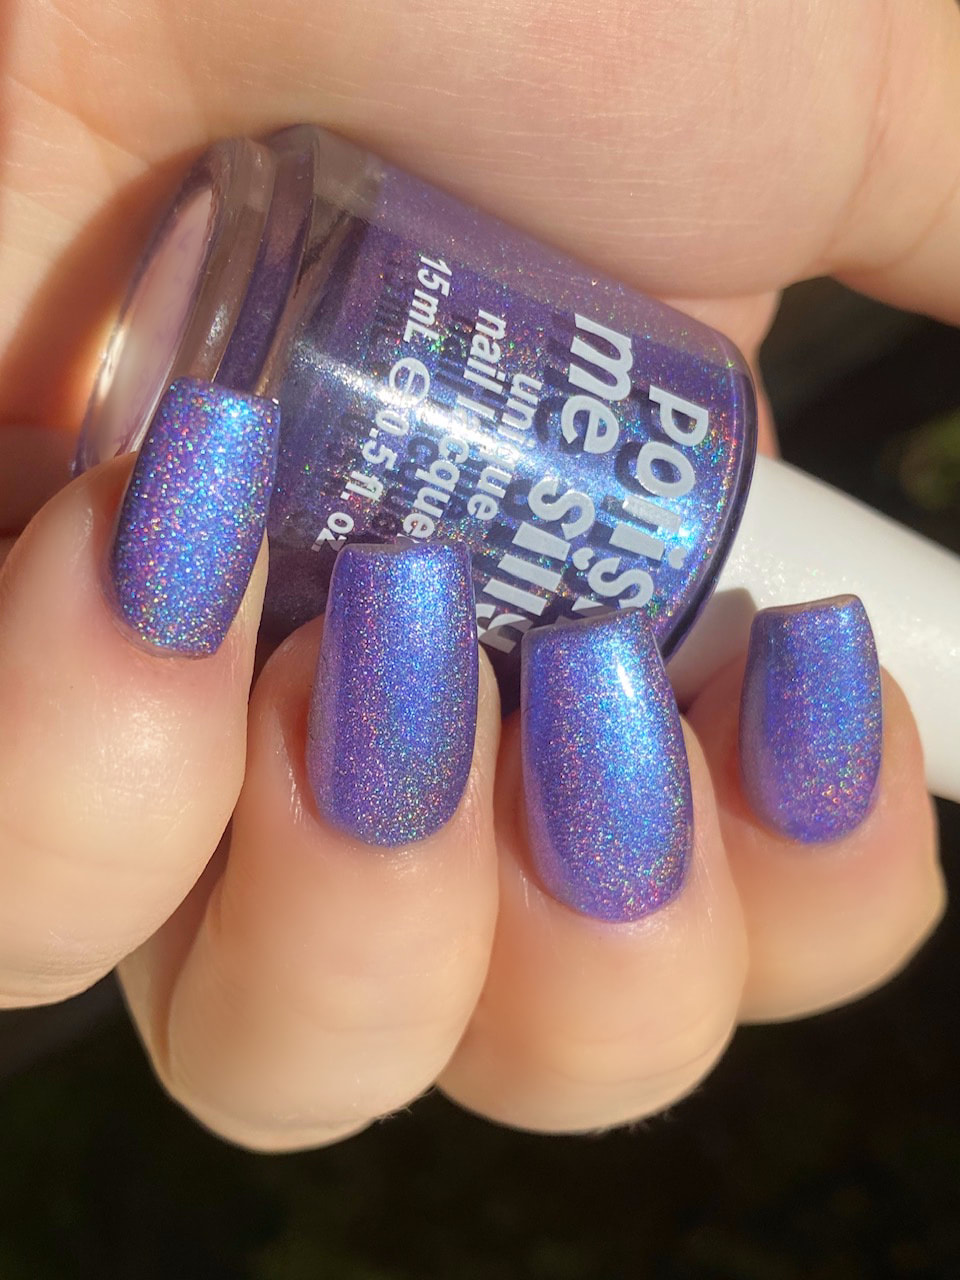 The Wizard - Holographic: Tan Pink Blue Shimmer Holographic